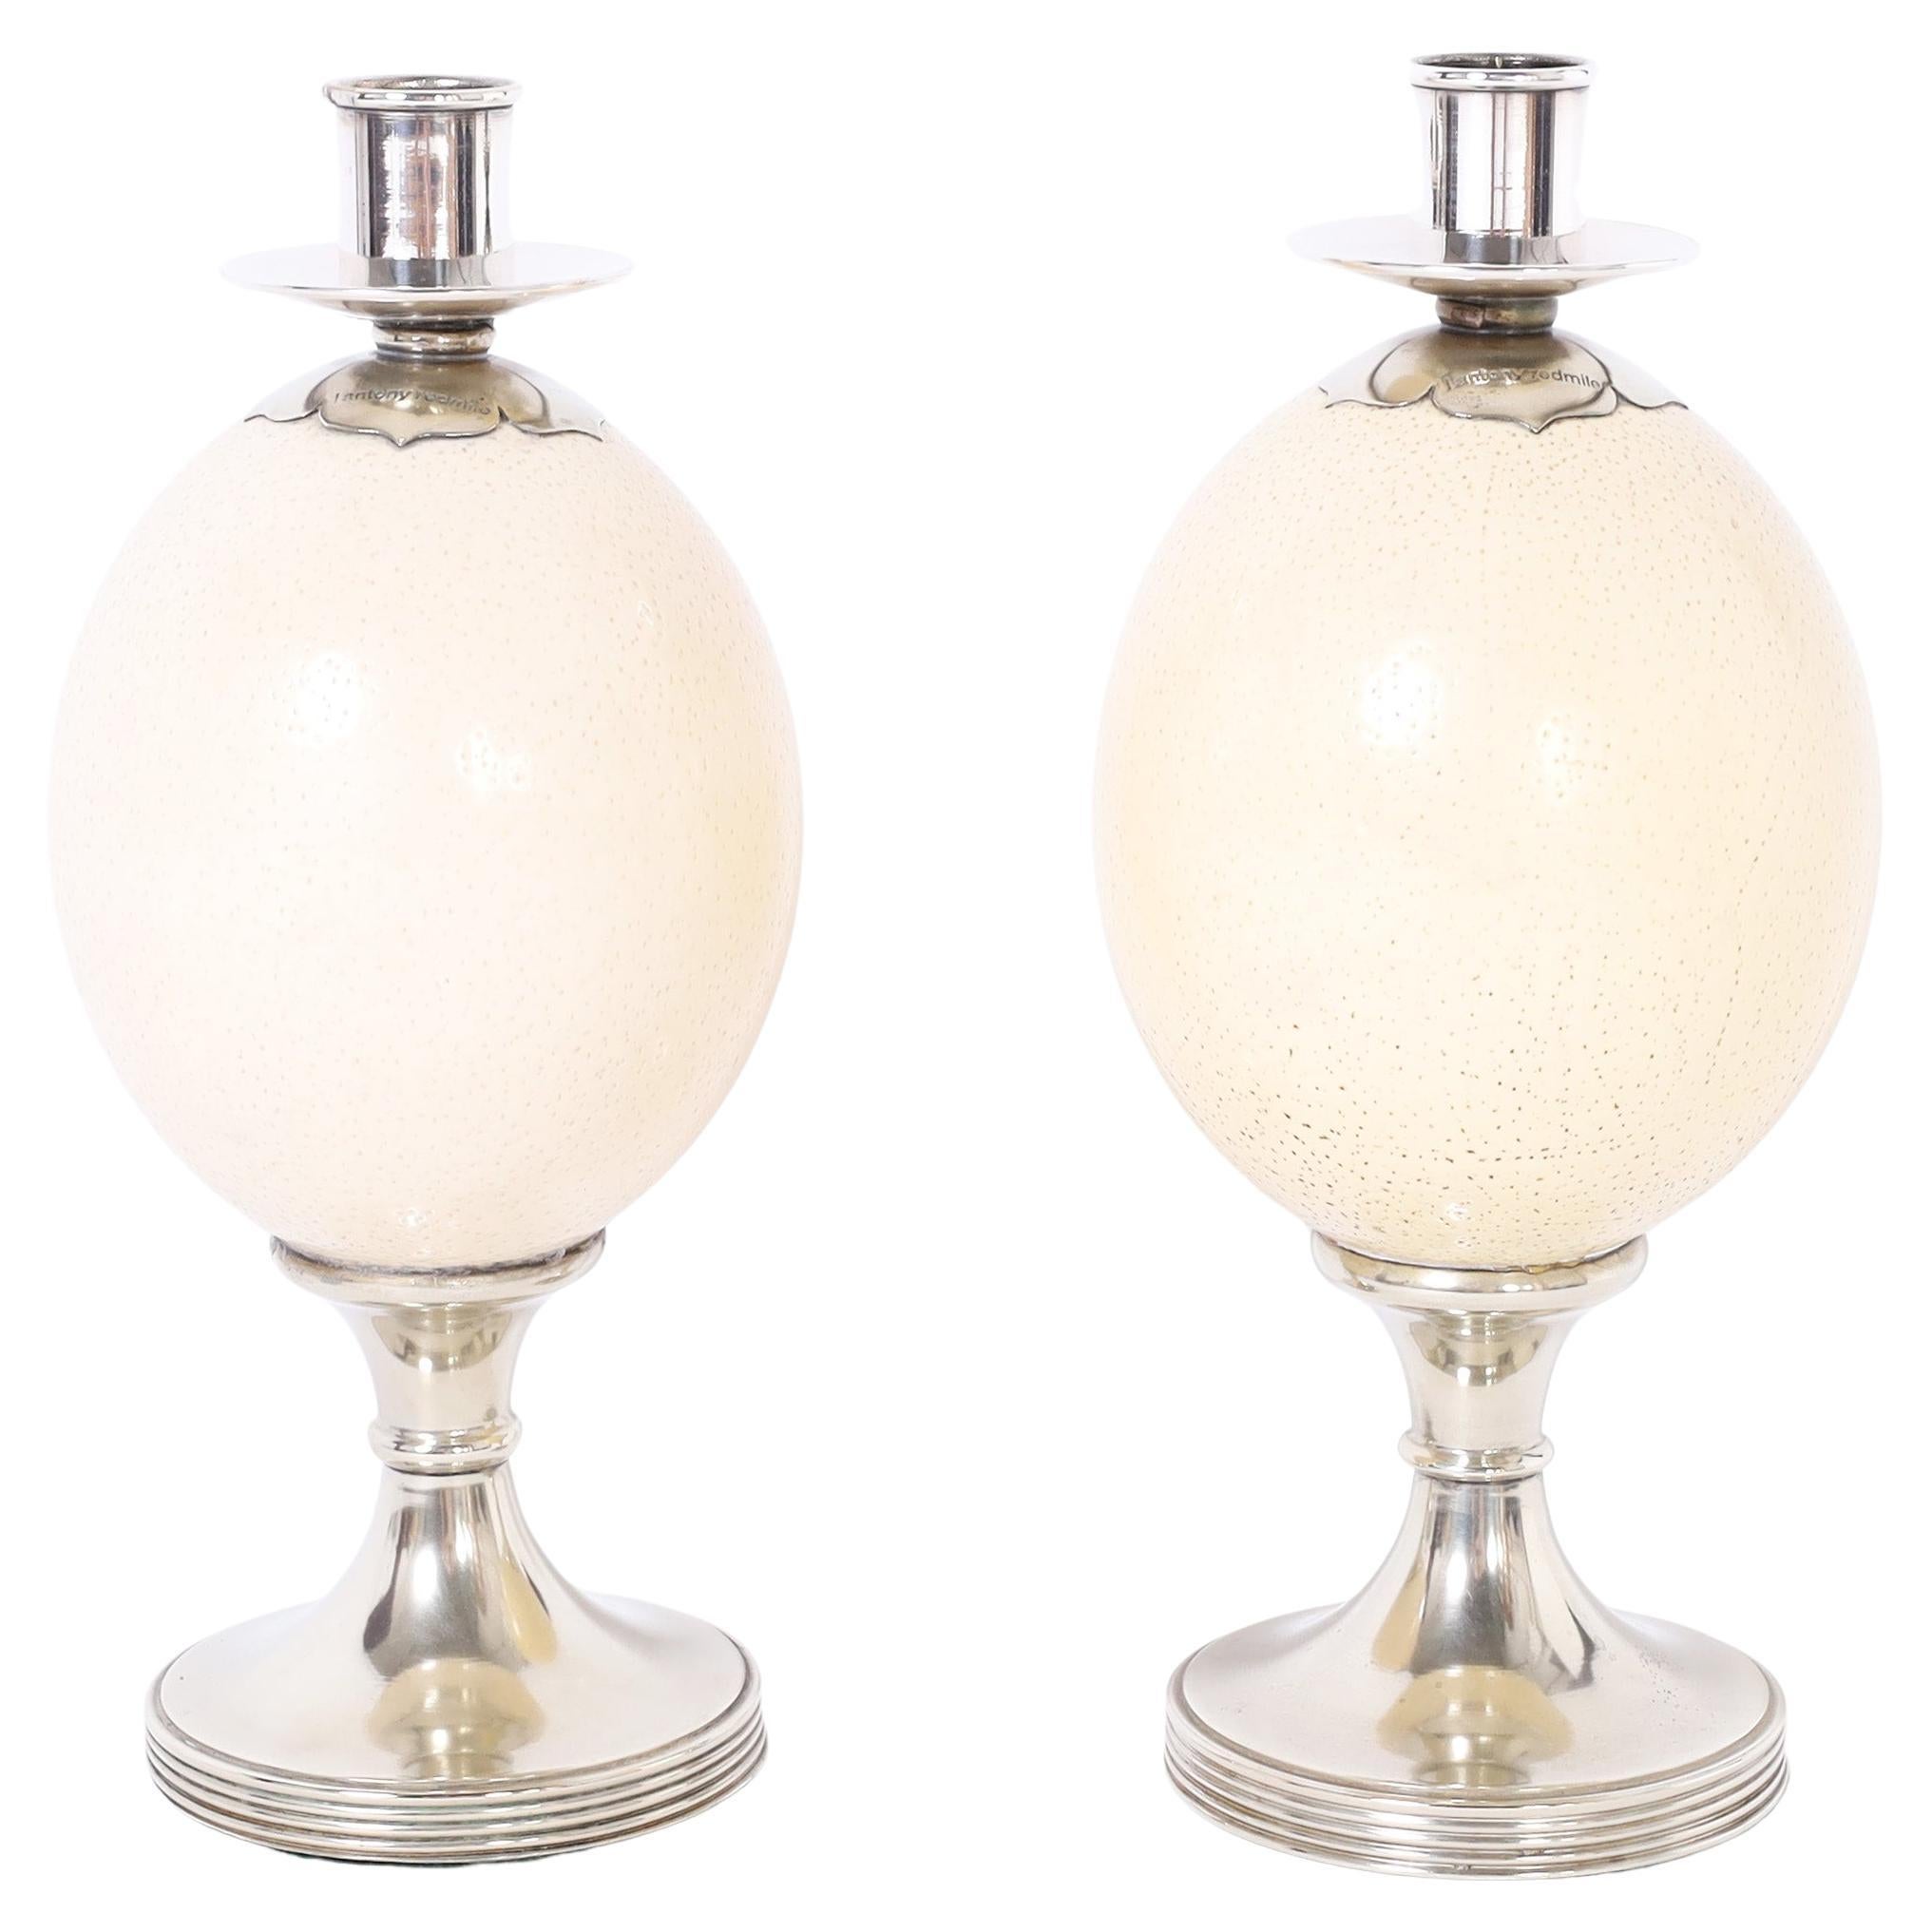  Antony Redmile Pair of Ostrich Egg Candlesticks For Sale